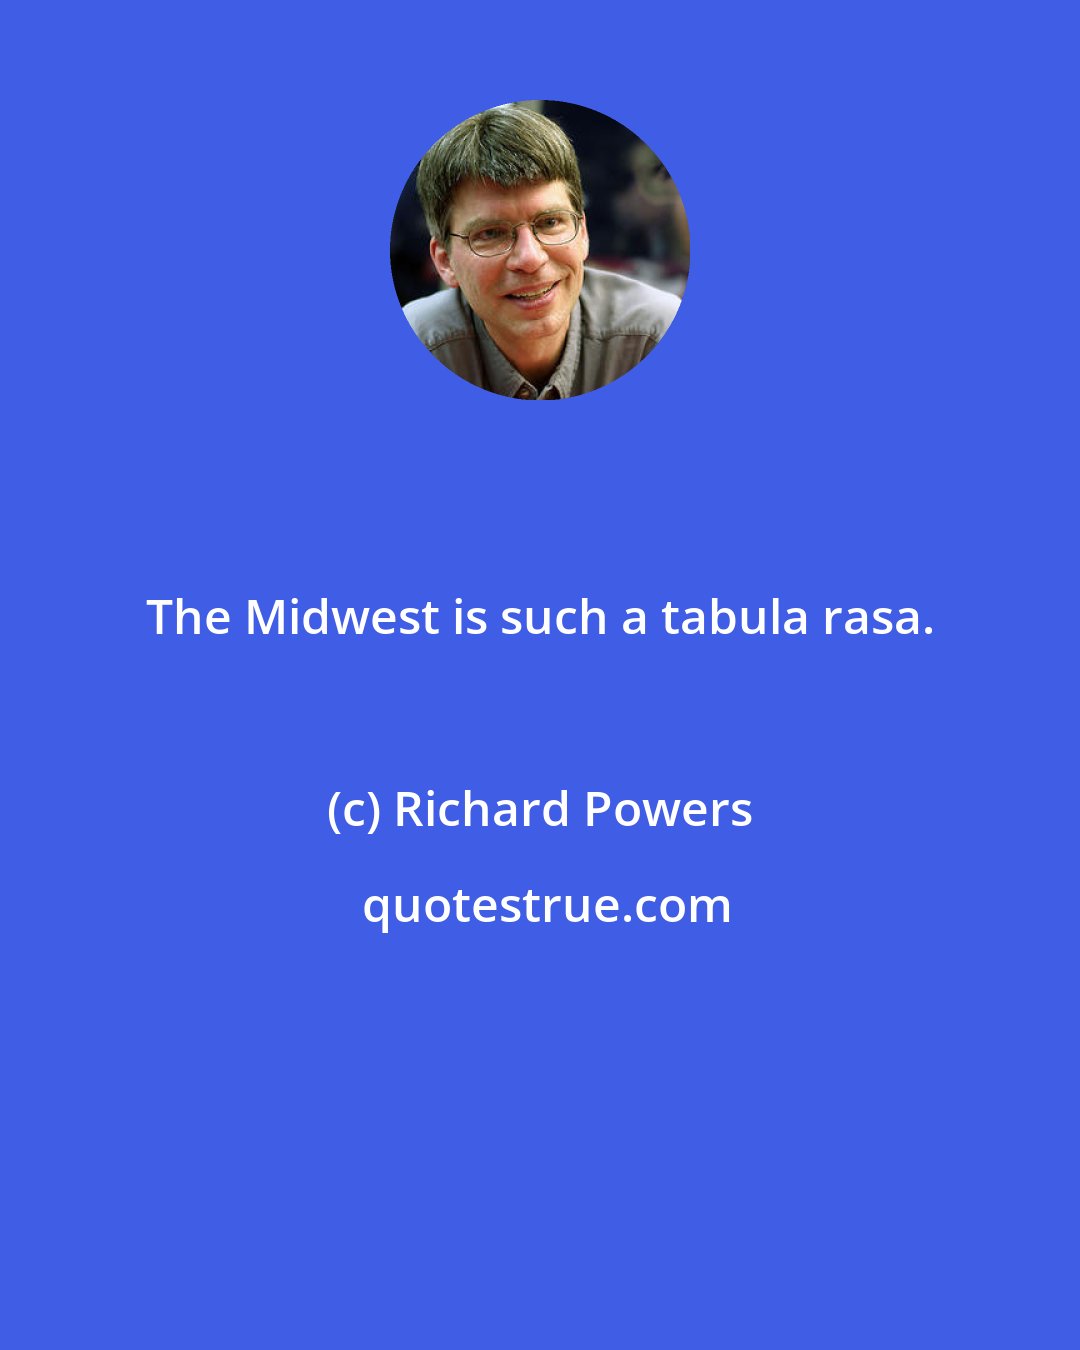 Richard Powers: The Midwest is such a tabula rasa.